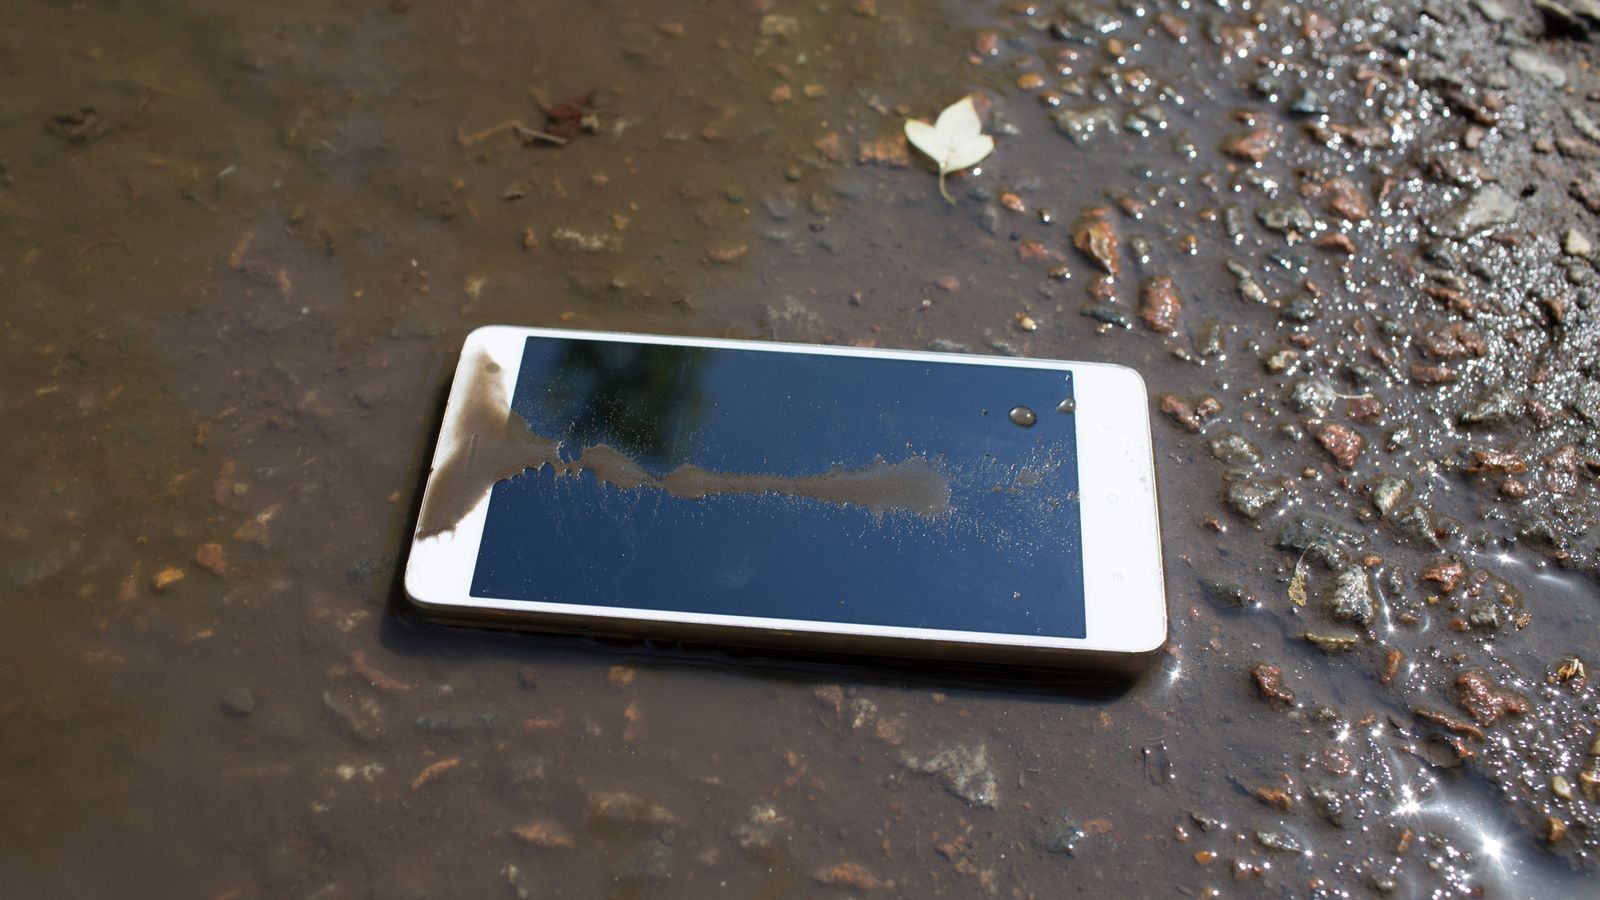 Senior Indian official fined for allowing reservoir to be drained in bid to find lost phone